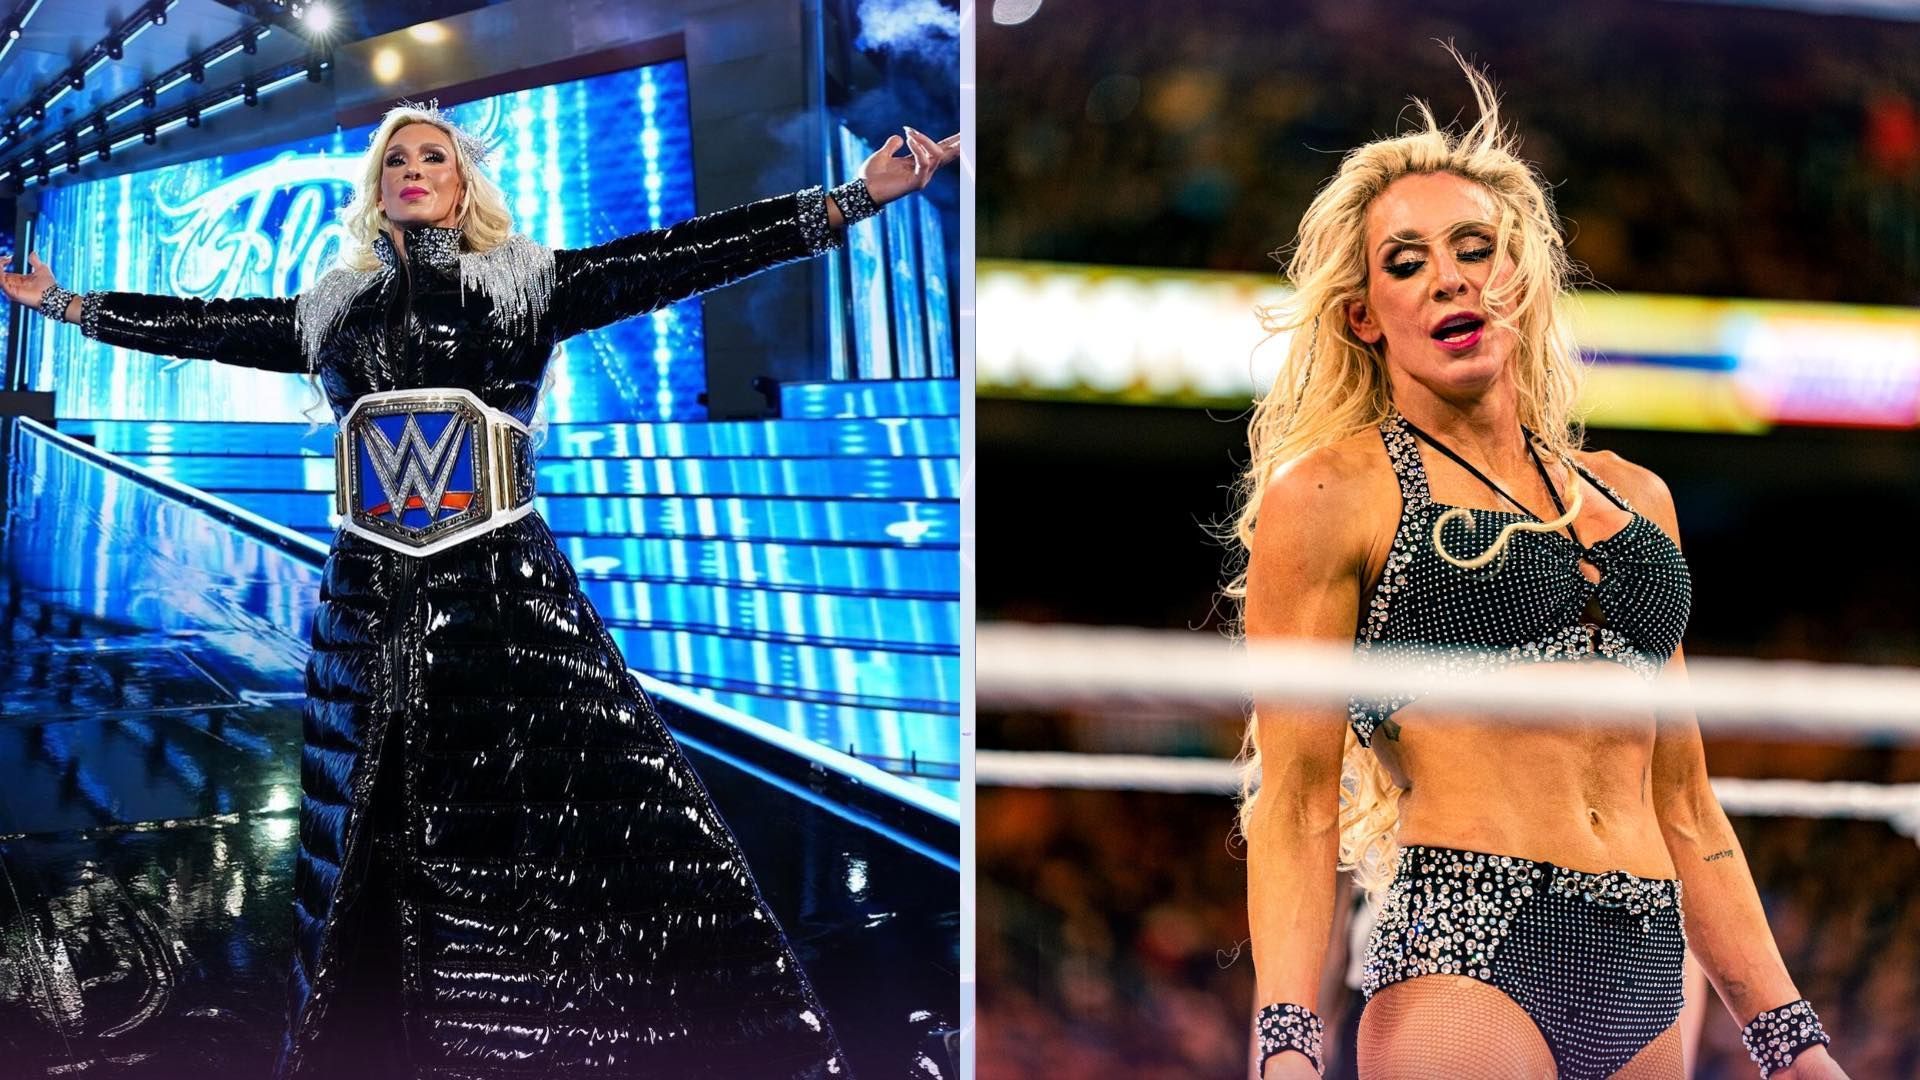 Charlotte Flair is a 14-time WWE women